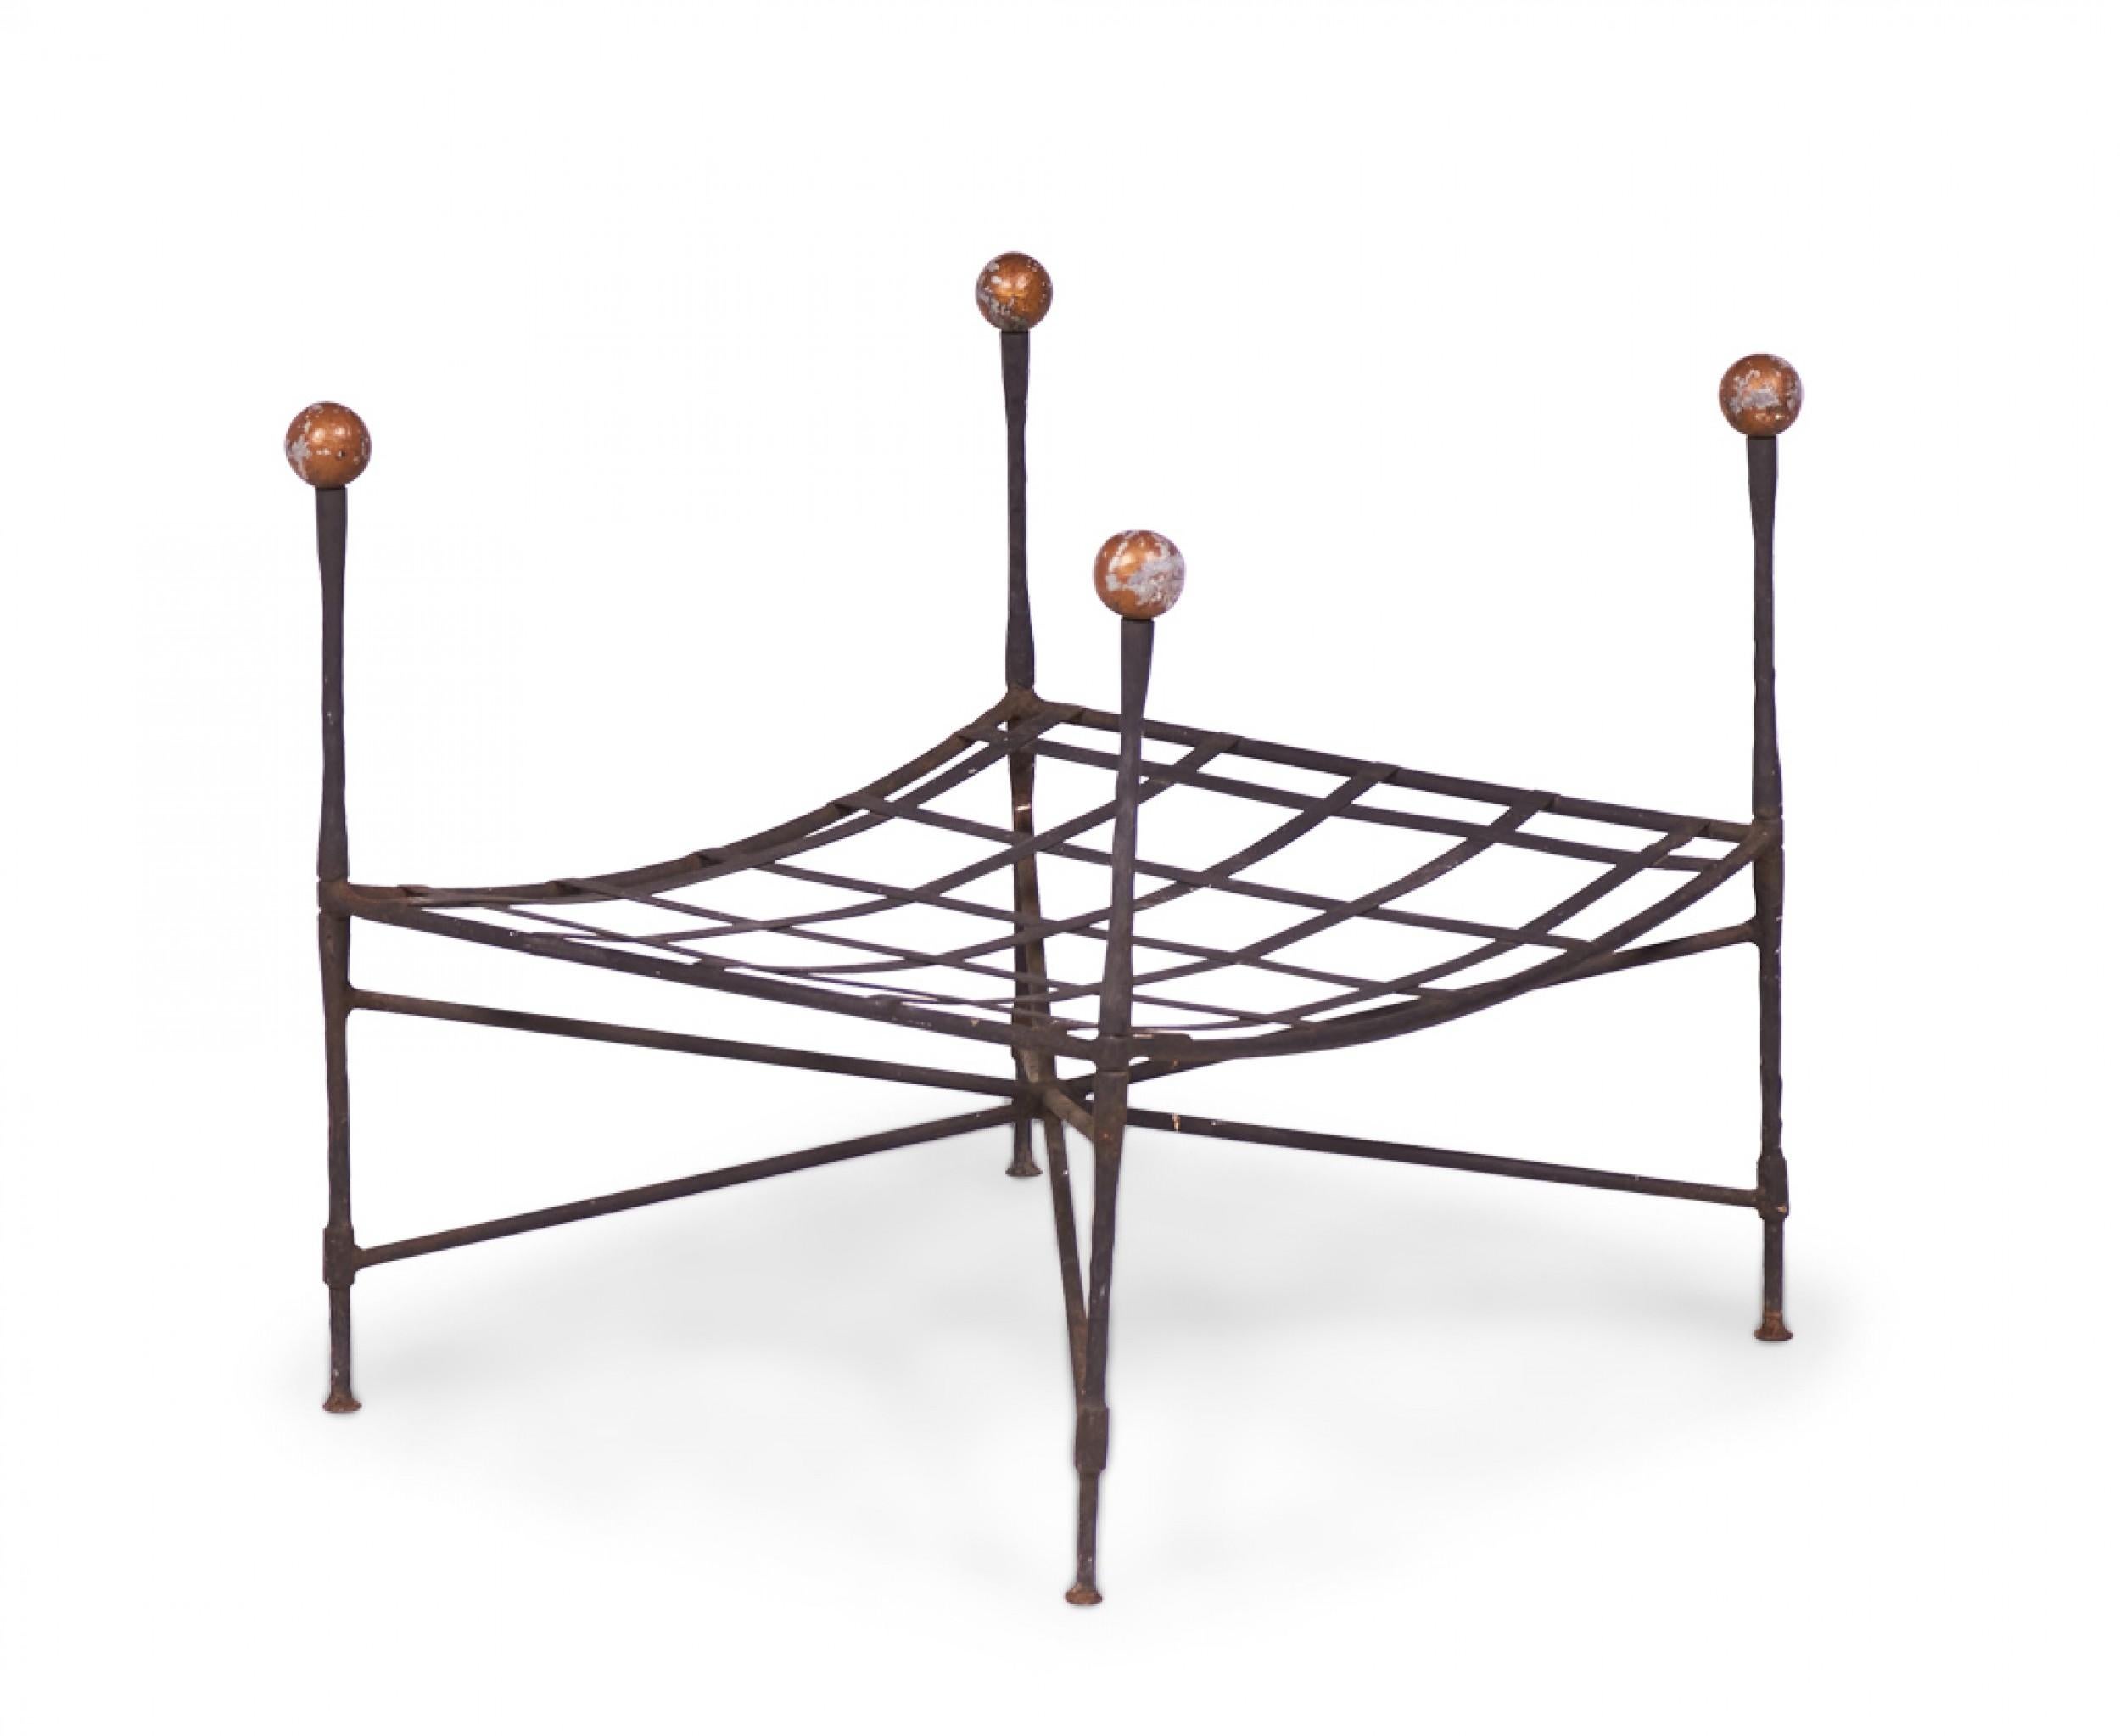 2 Pairs of John Salterini American Mid-Century Iron Outdoor Ottomans In Good Condition For Sale In New York, NY